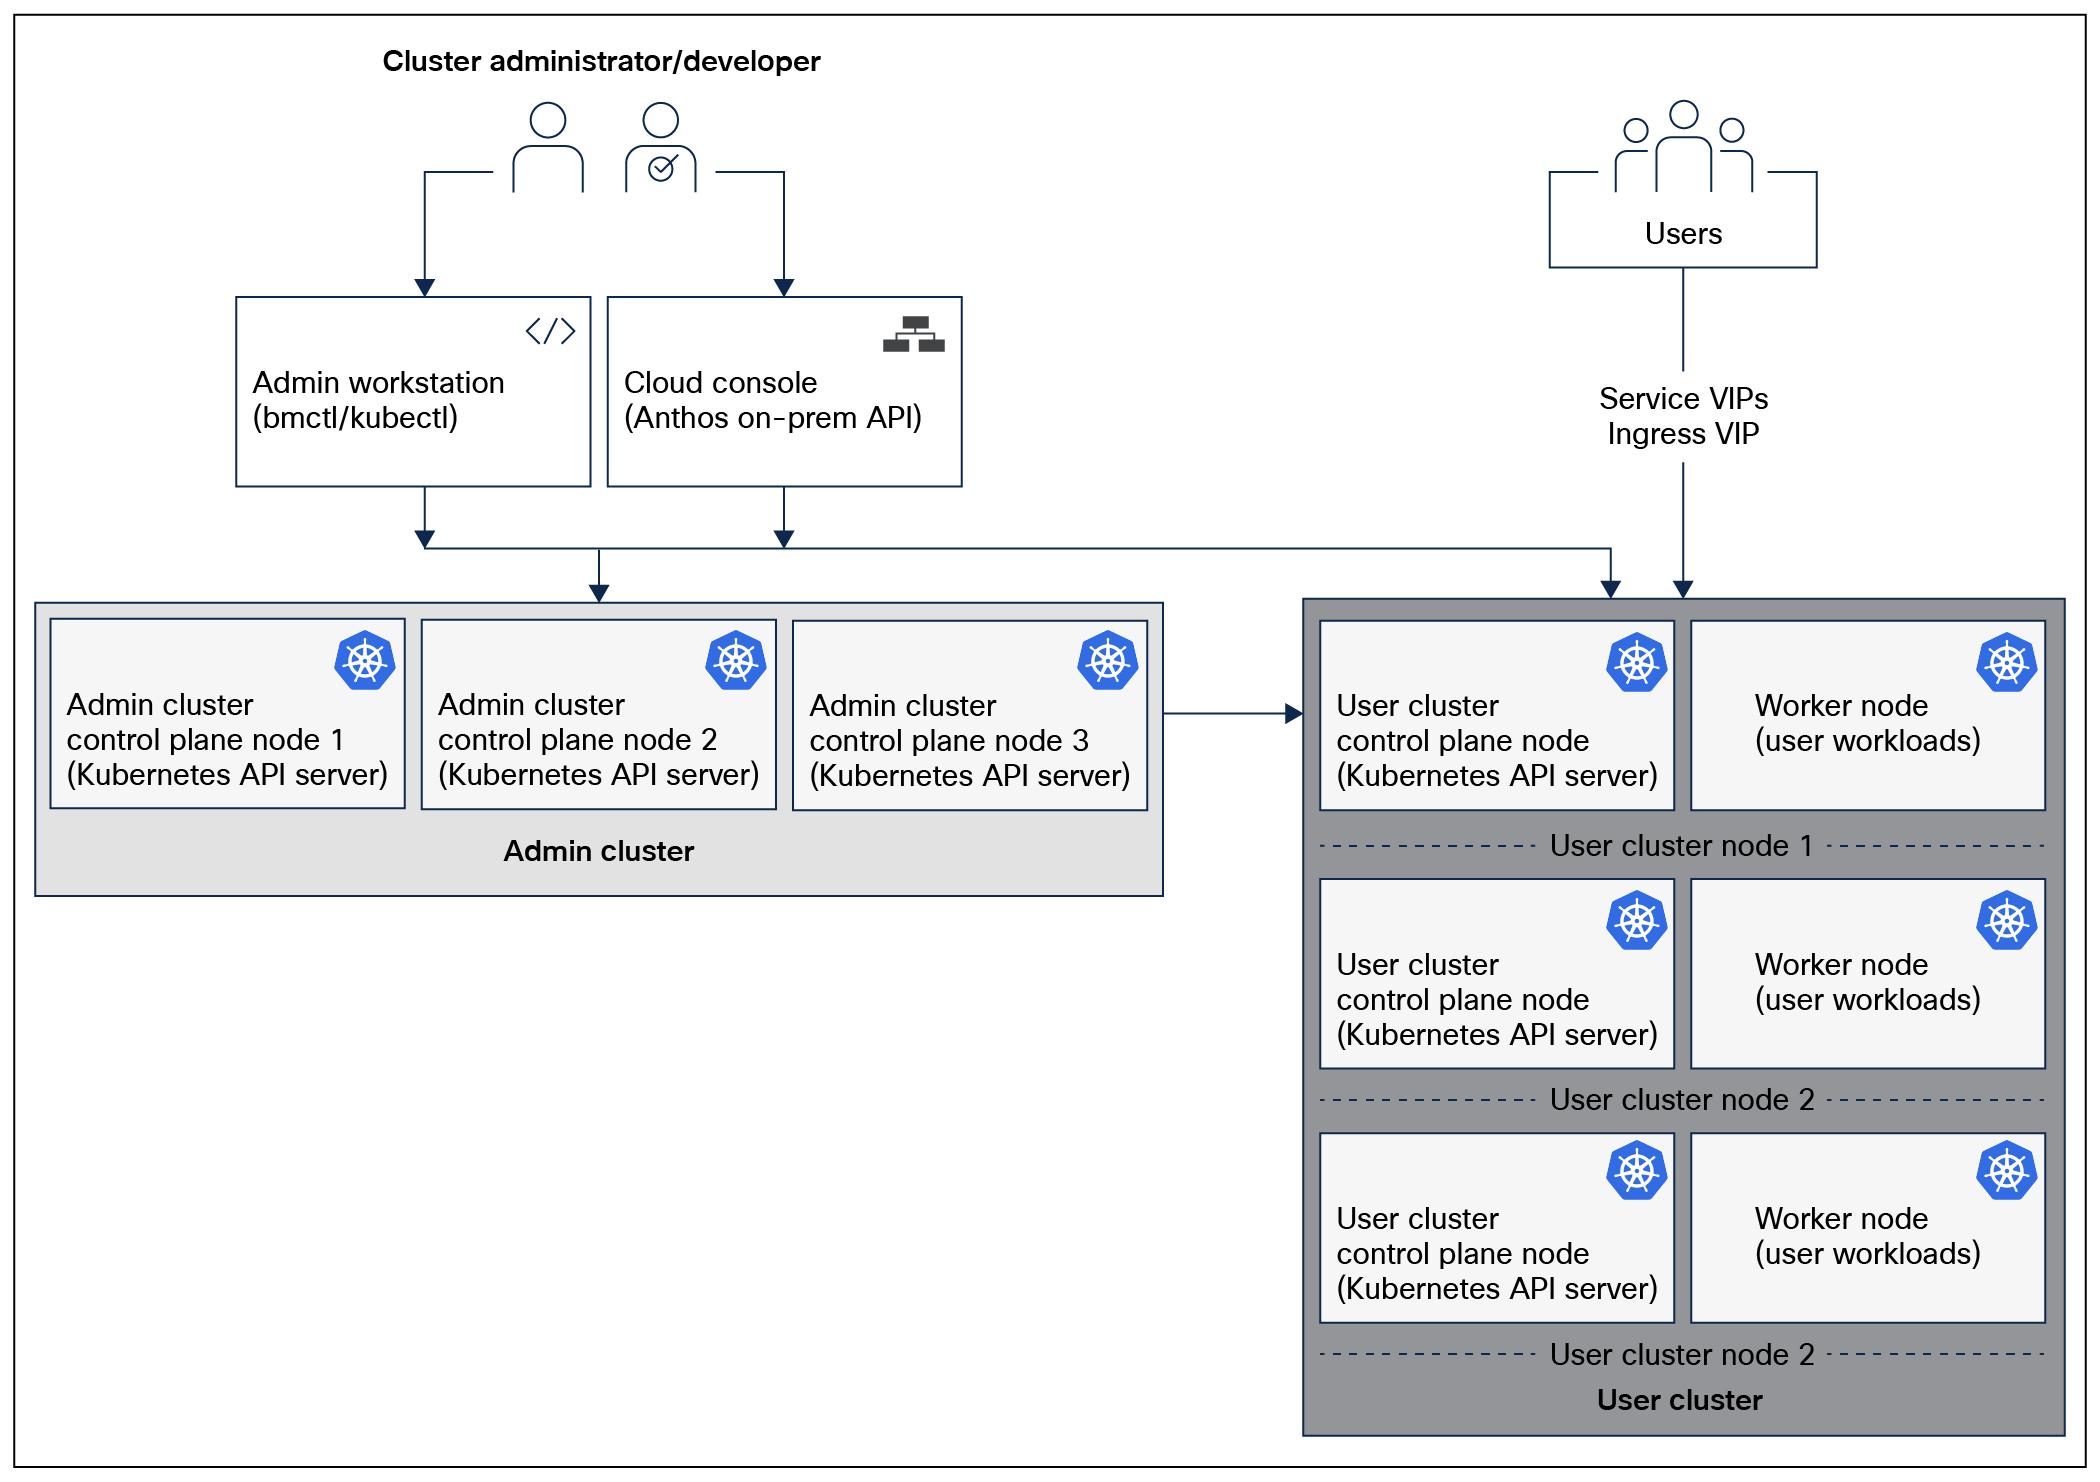 Google Anthos logical architecture for admin and user cluster deployment model in HA configuration